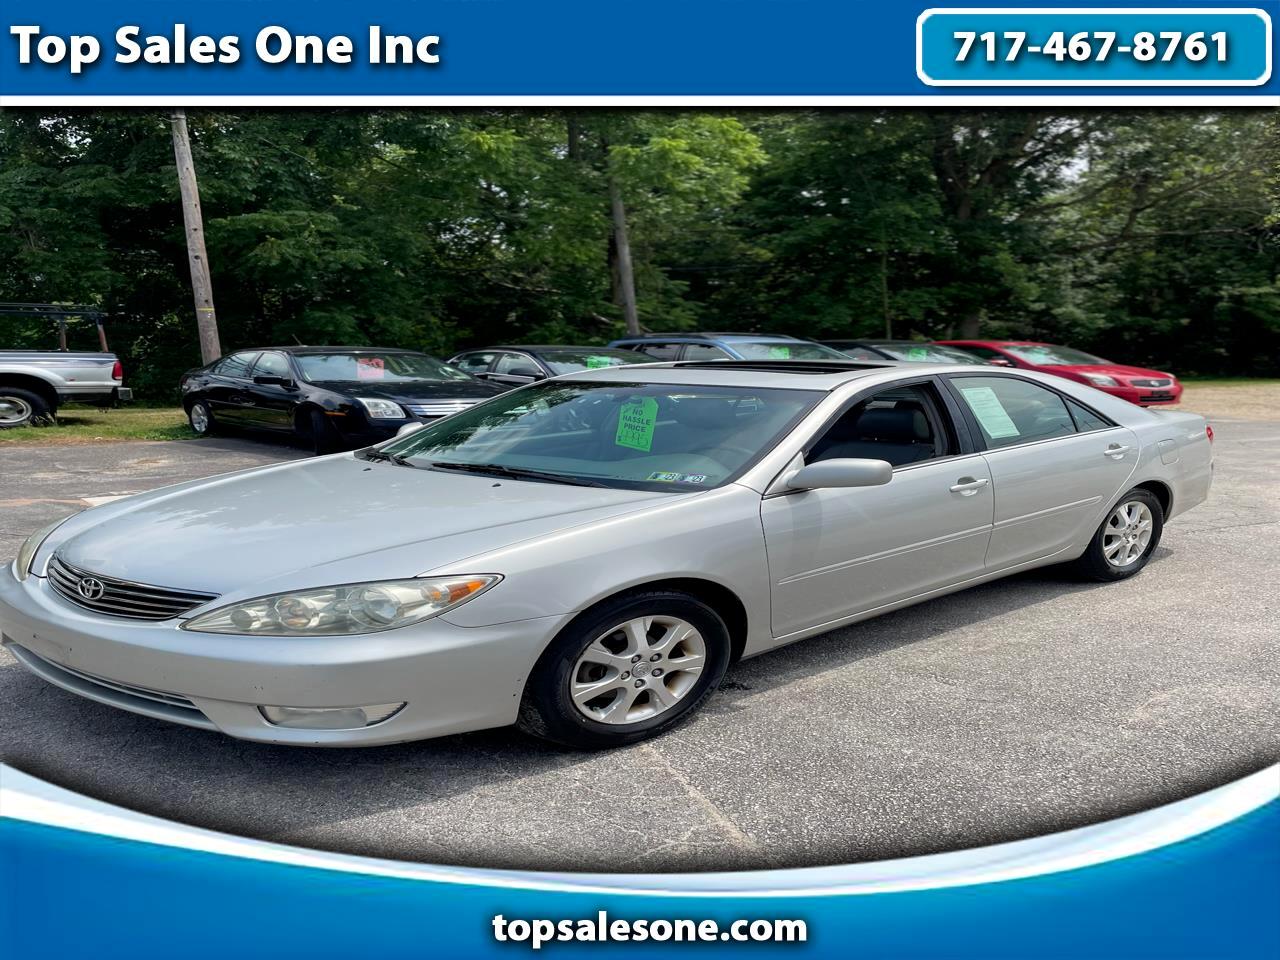 Toyota Camry 4dr Sdn XLE Auto (Natl) 2005